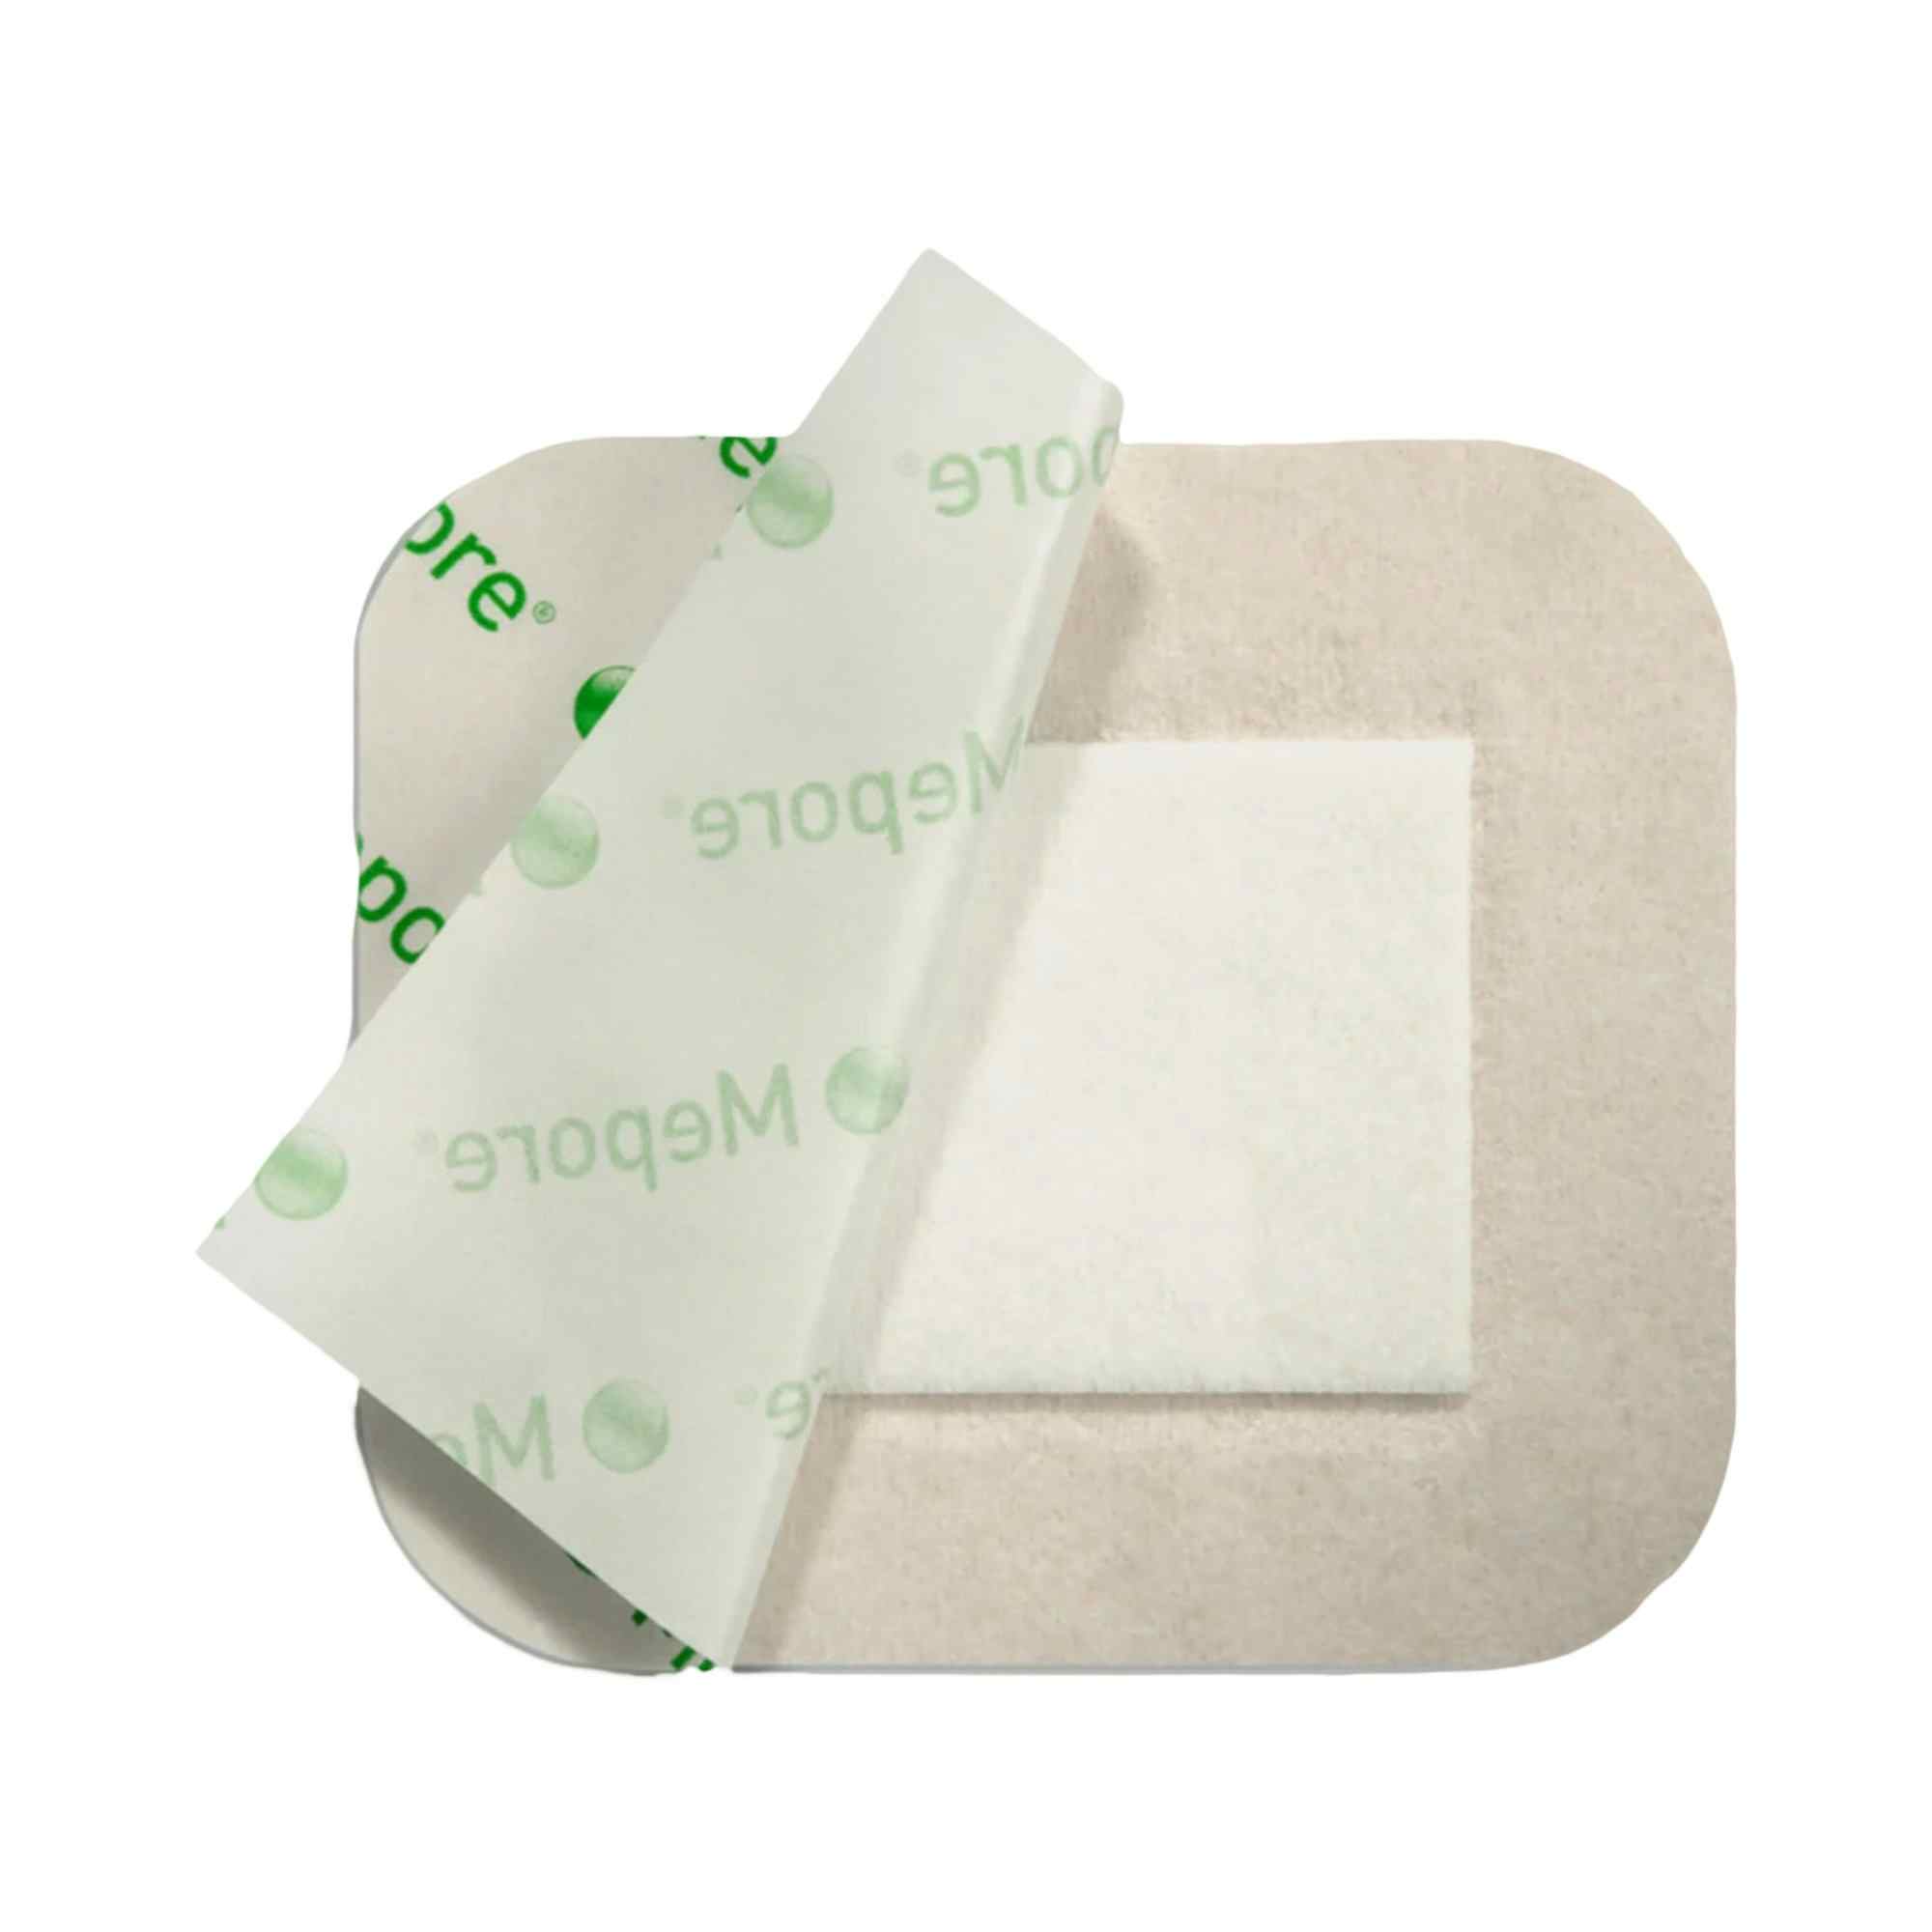 Mepore Pro Absorbent Dressing, 3.6 X 8"